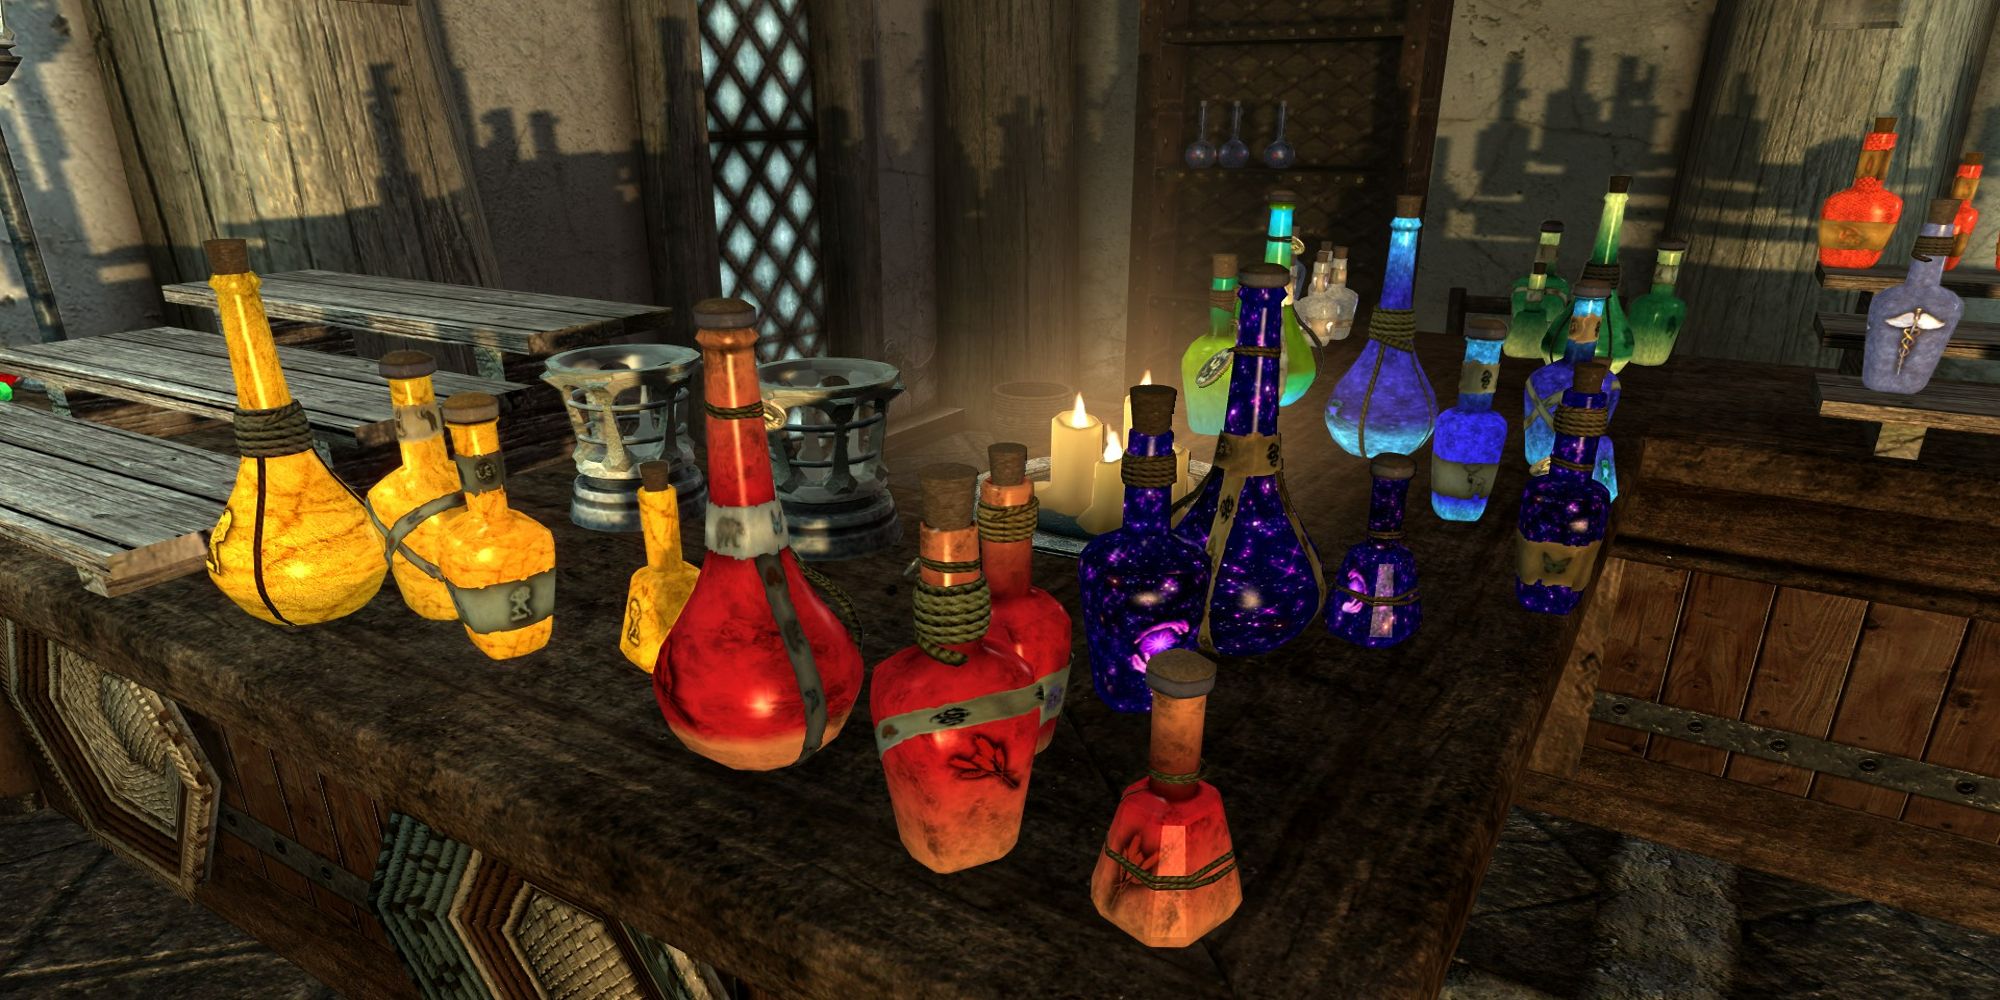 A featured image for Skyrim featuring all the unique potions in the game